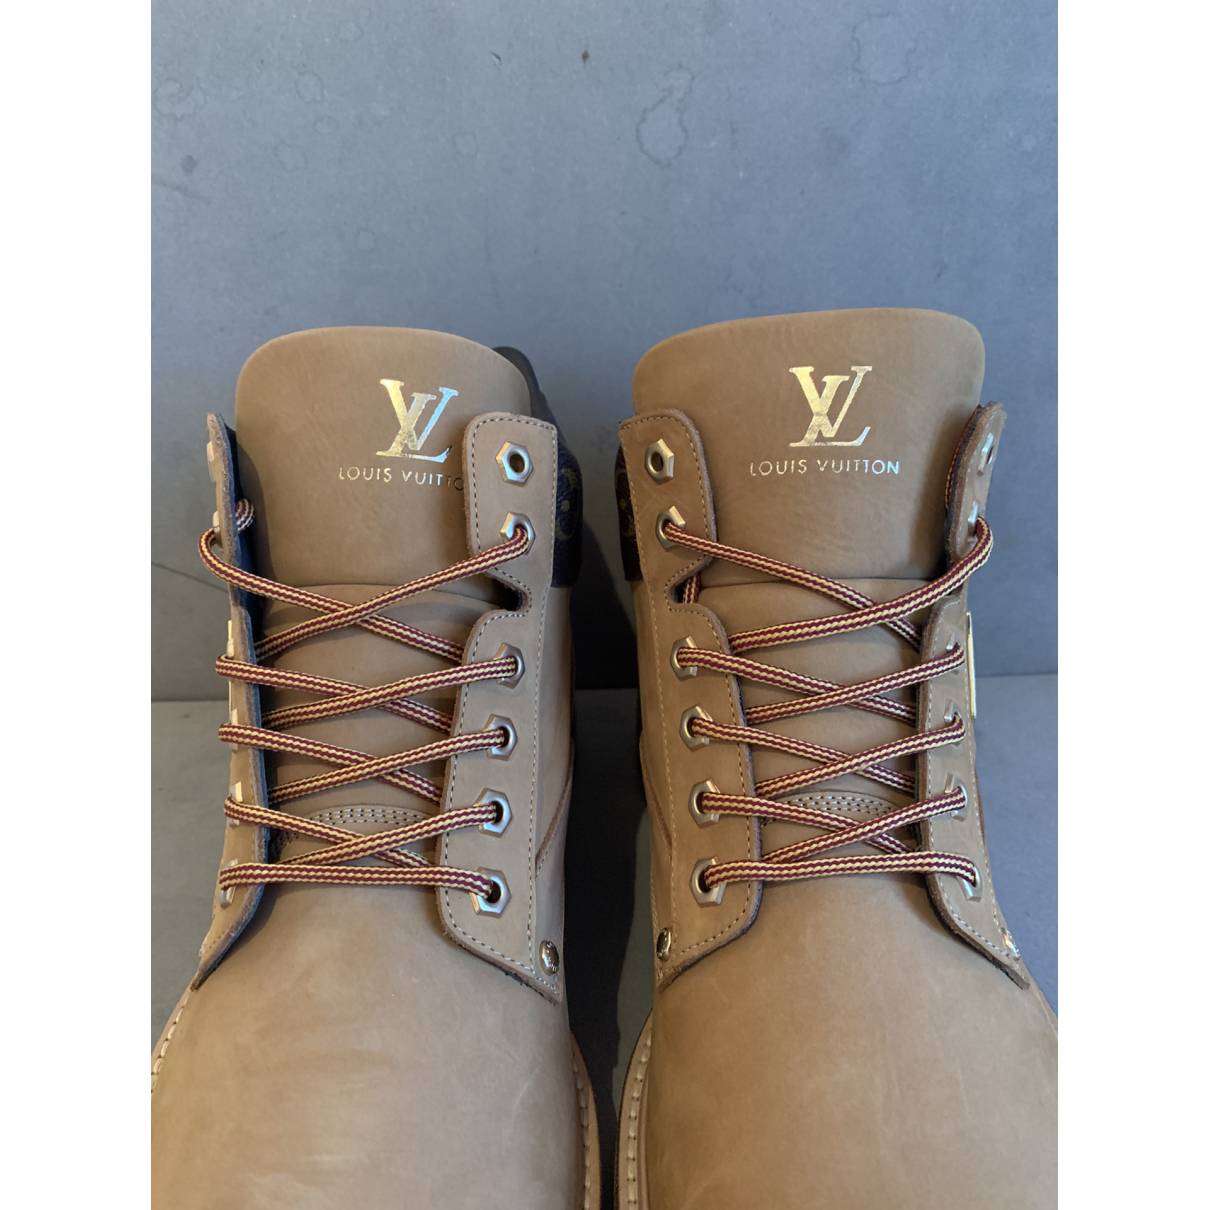 Oberkampf leather boots Louis Vuitton Beige size 12 US in Leather